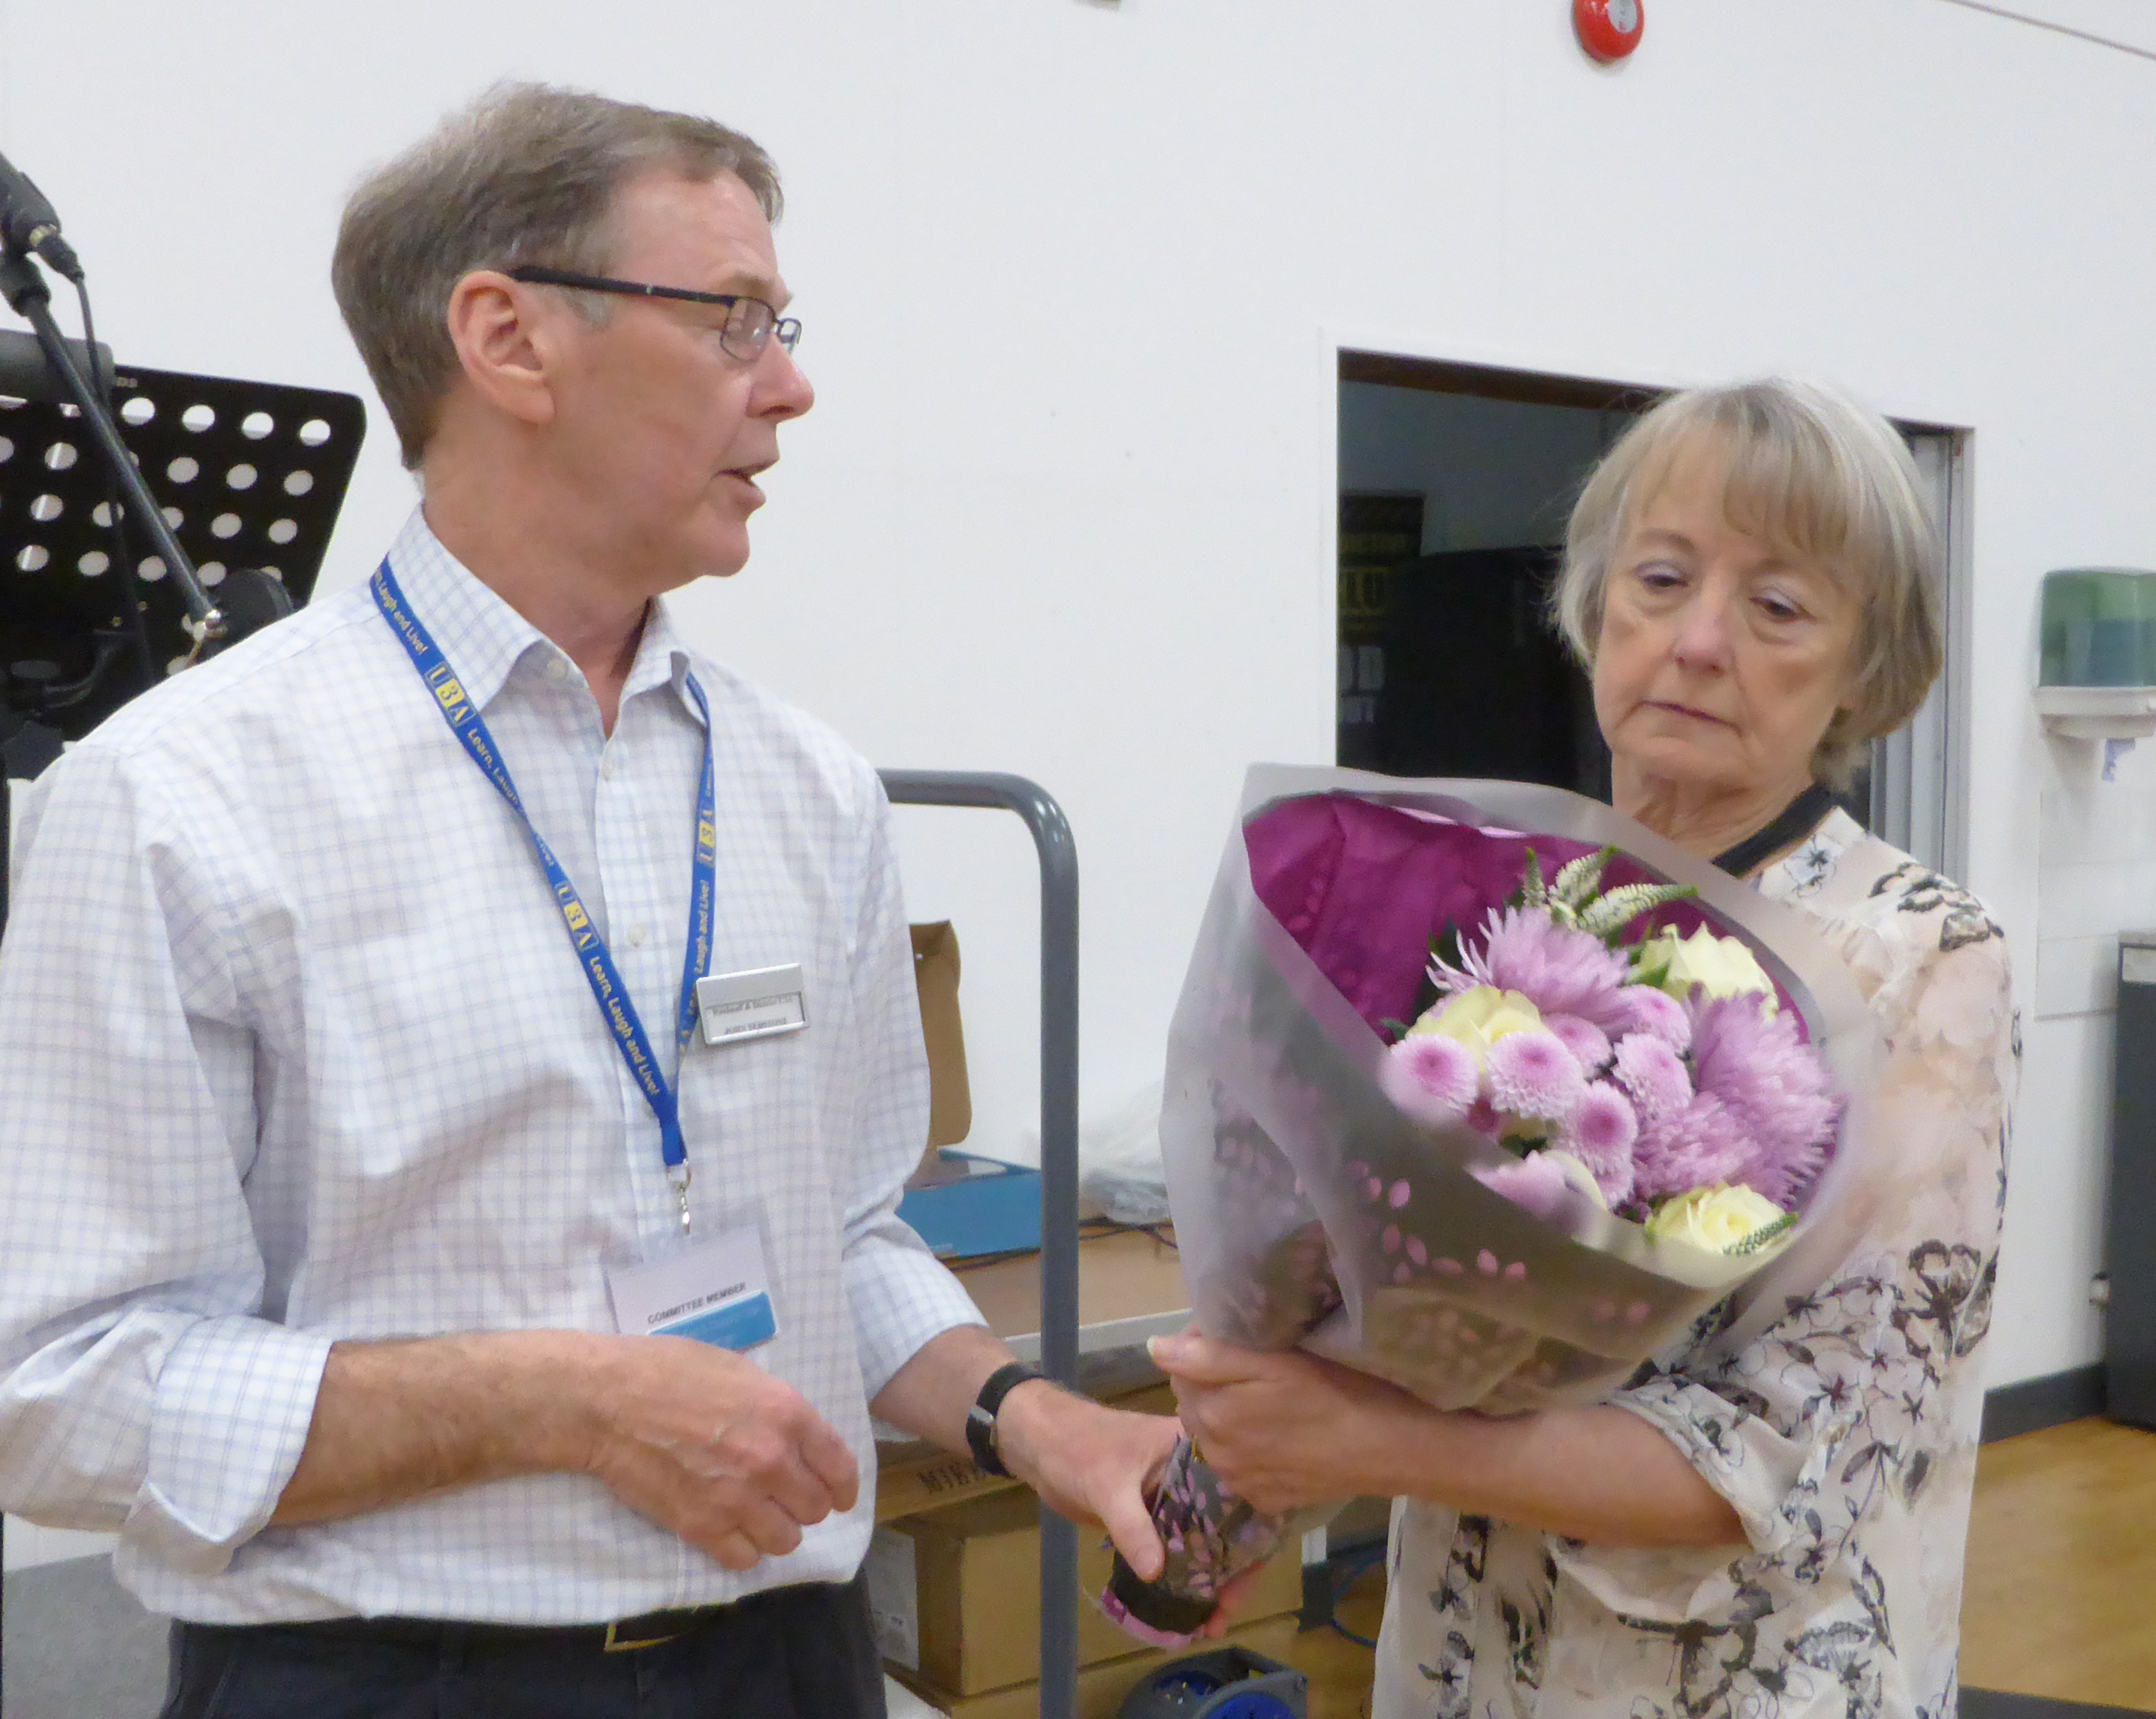 Thanks to Vivian who is retiring from the Committee for all her hard work